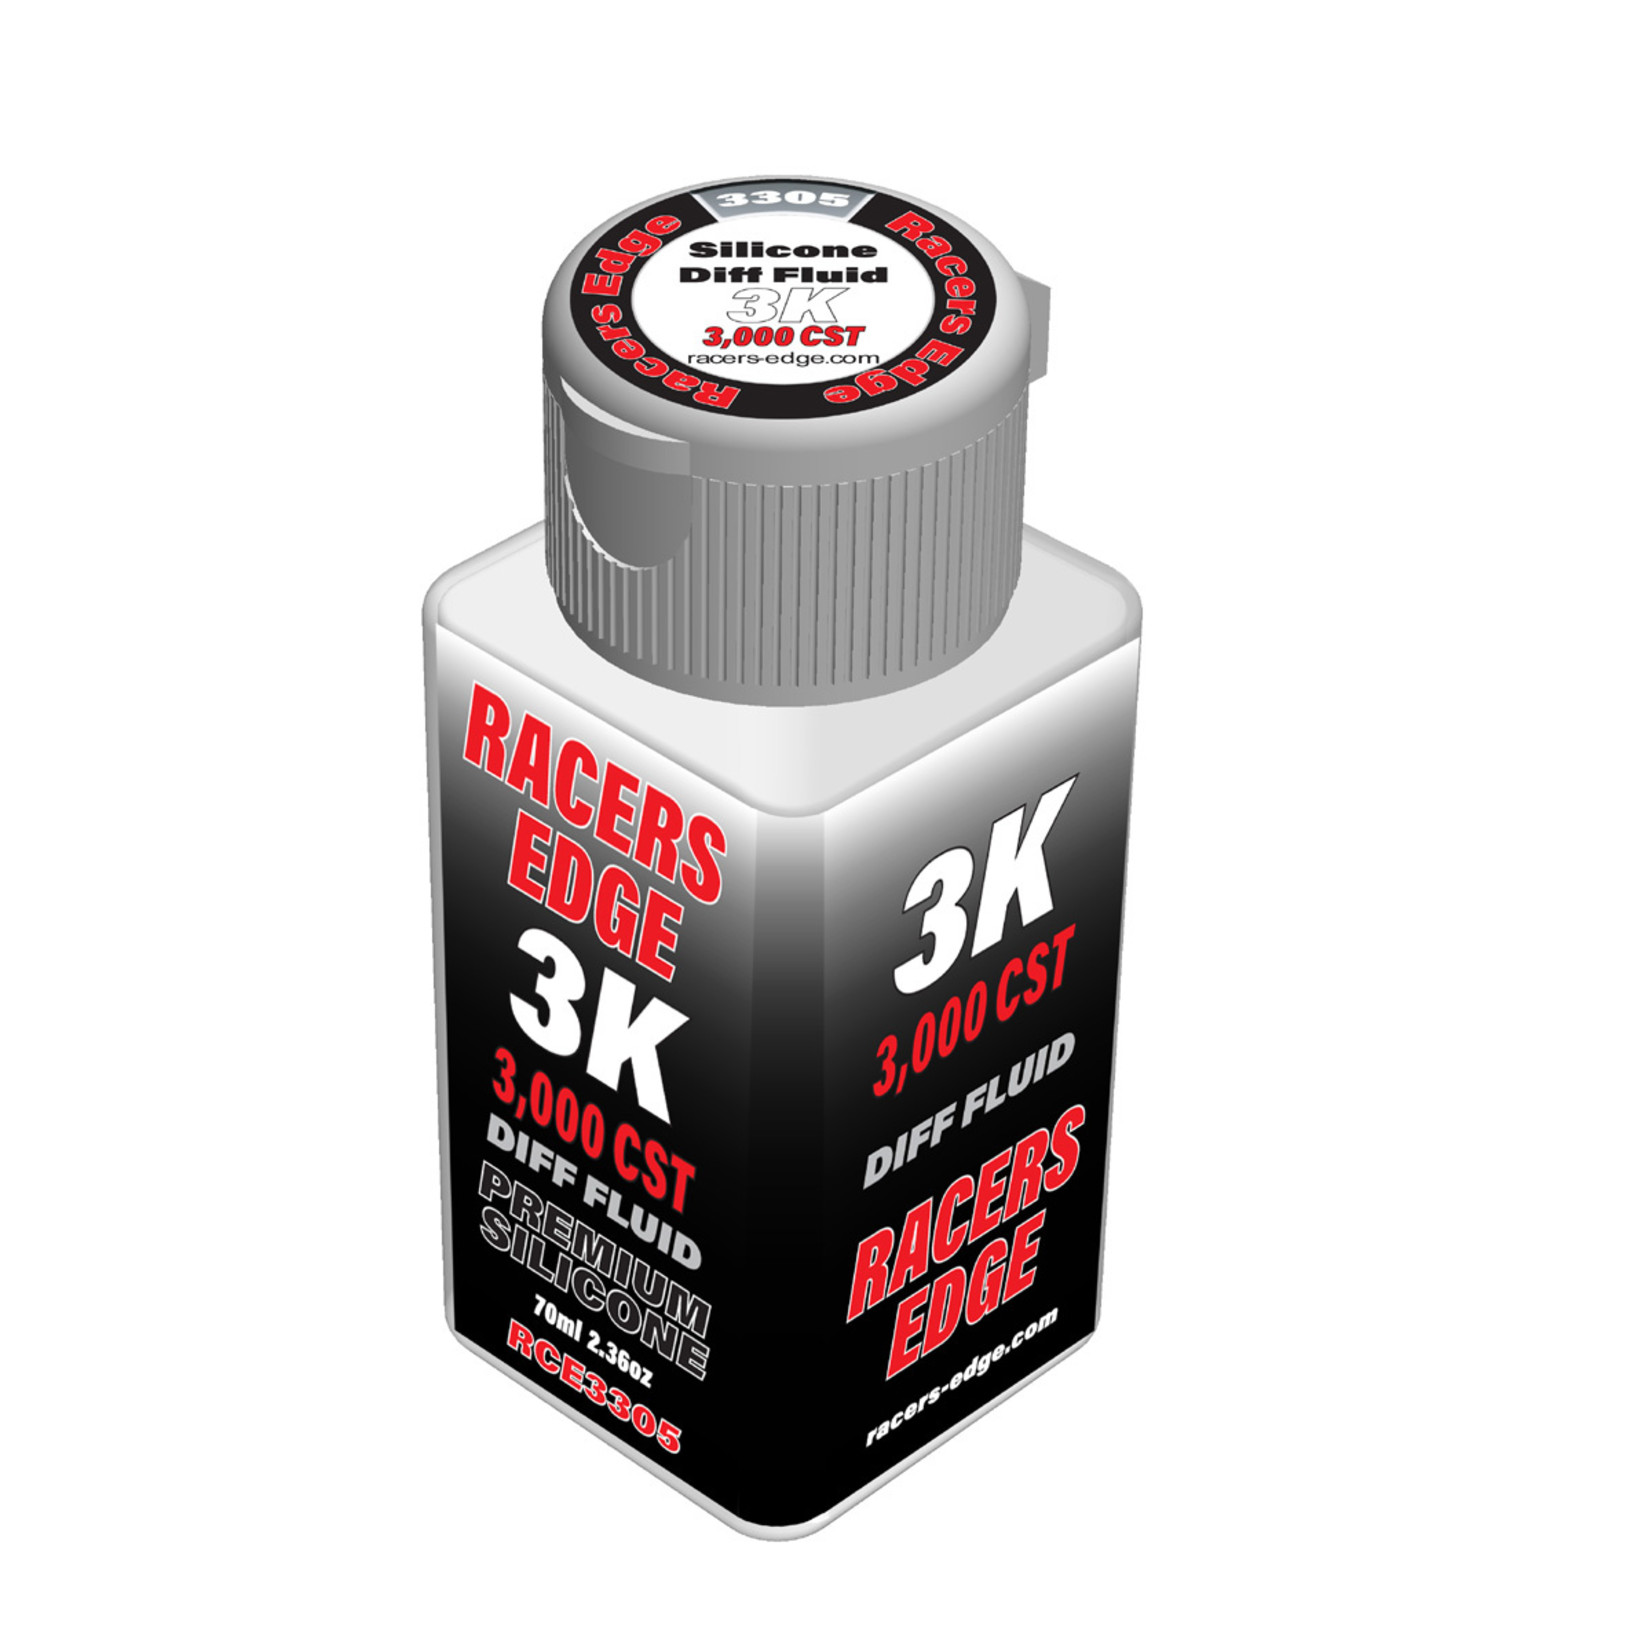 Racers Edge RCE3305 - 3,000cSt 70ml 2.36oz Pure Silicone Diff Fluid